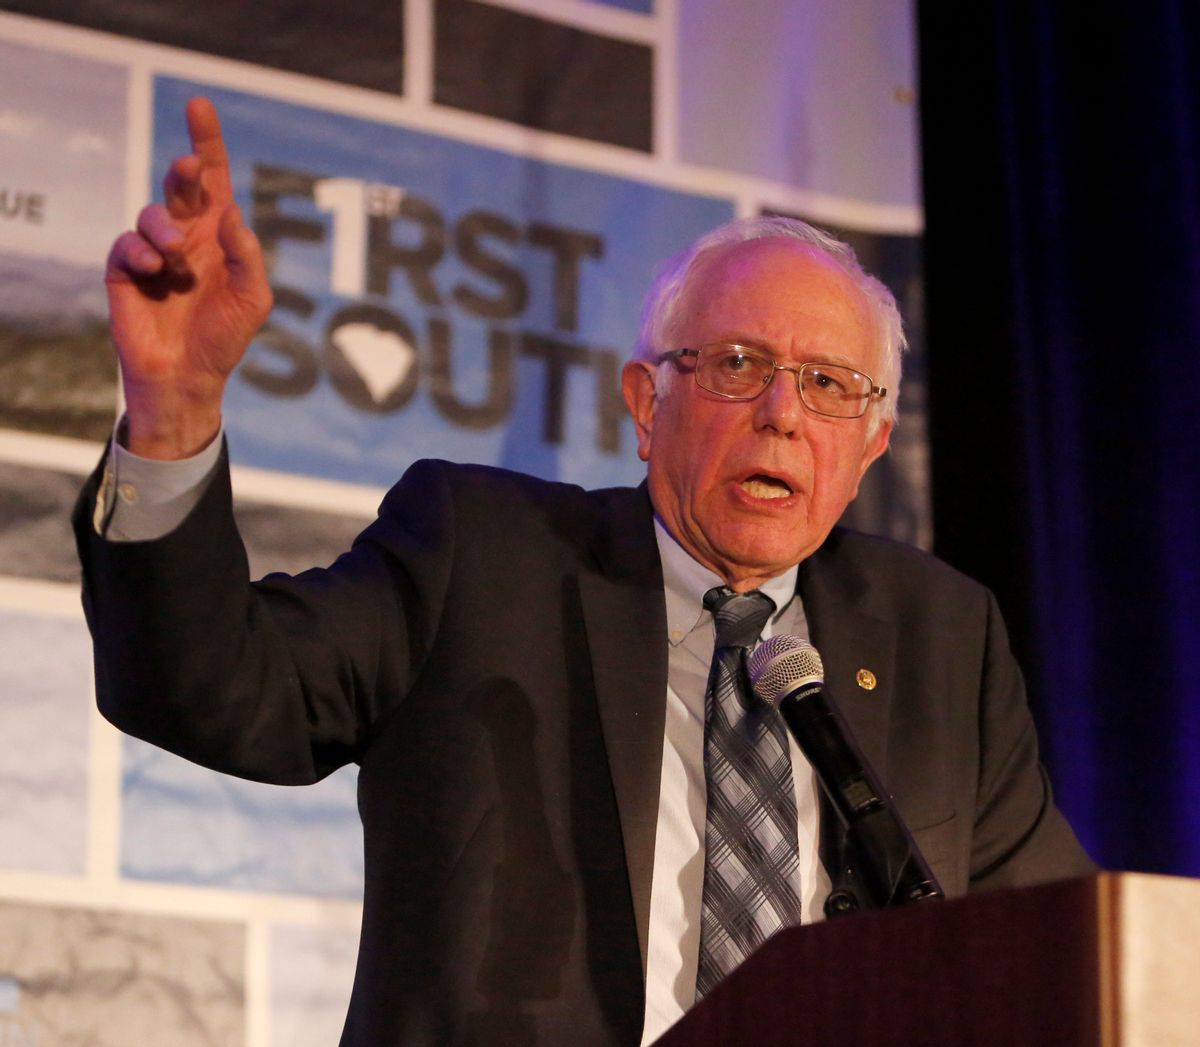 Democratic presidential candidate Sen. Bernie Sanders, I-Vt., speaks during the First in the South Dinner at the Charleston Mariott Saturday, Jan. 16, 2016, in Charleston, S.C. (AP Photo/Mic Smith) (AP)